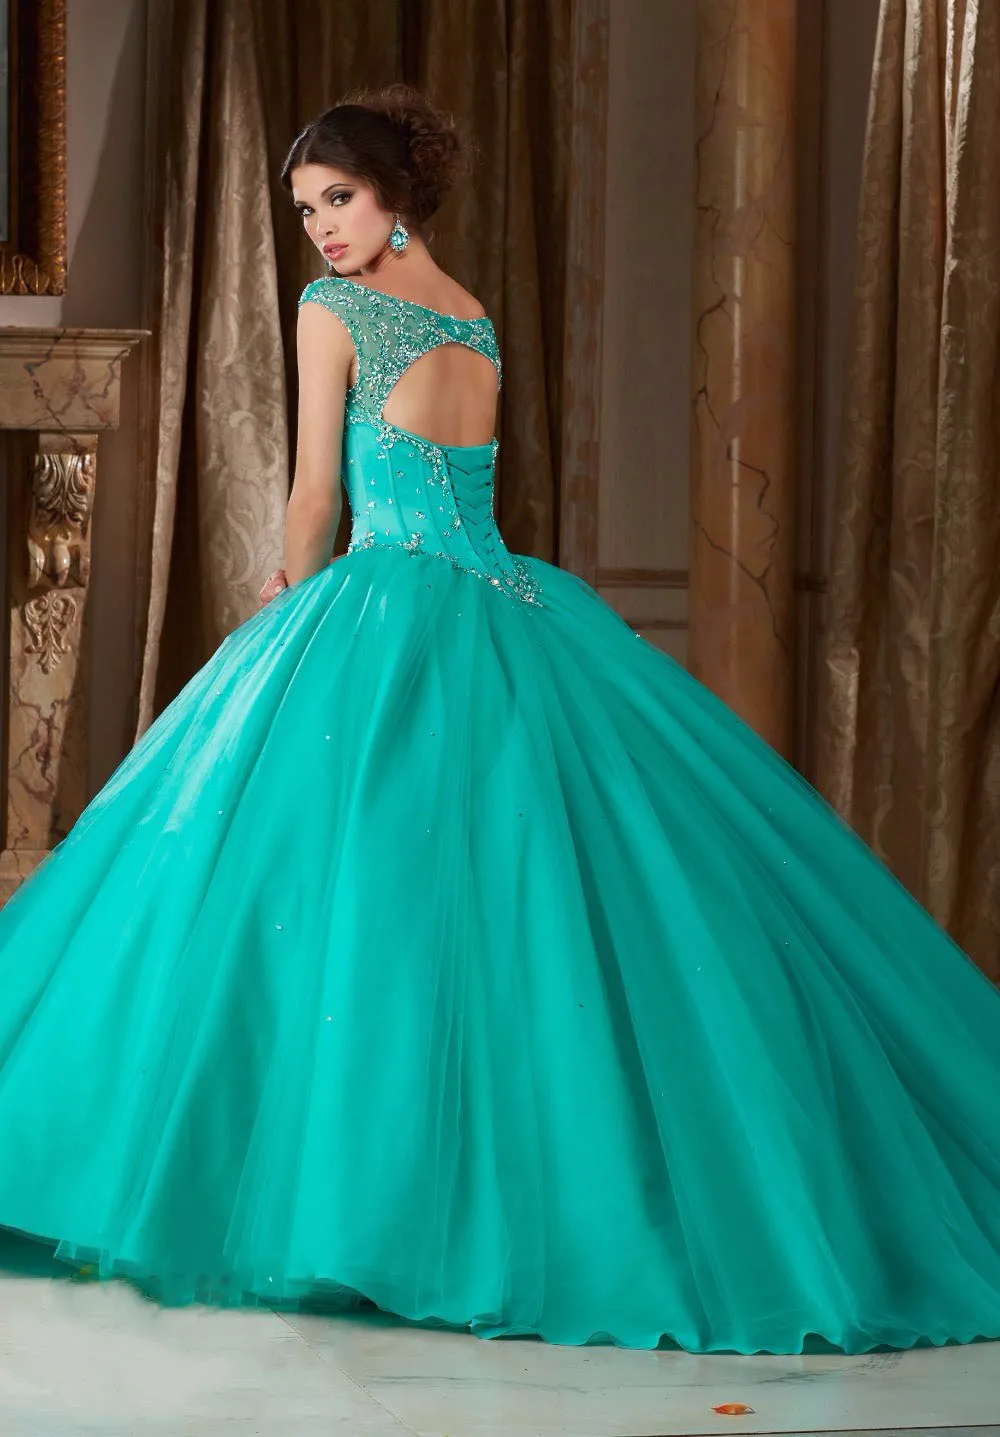 Latest Ball Gown Sweetheart Crystal Beading Aqua Green Quicneanera Dress 15  Years Party Gown - Quinceanera Dresses - AliExpress